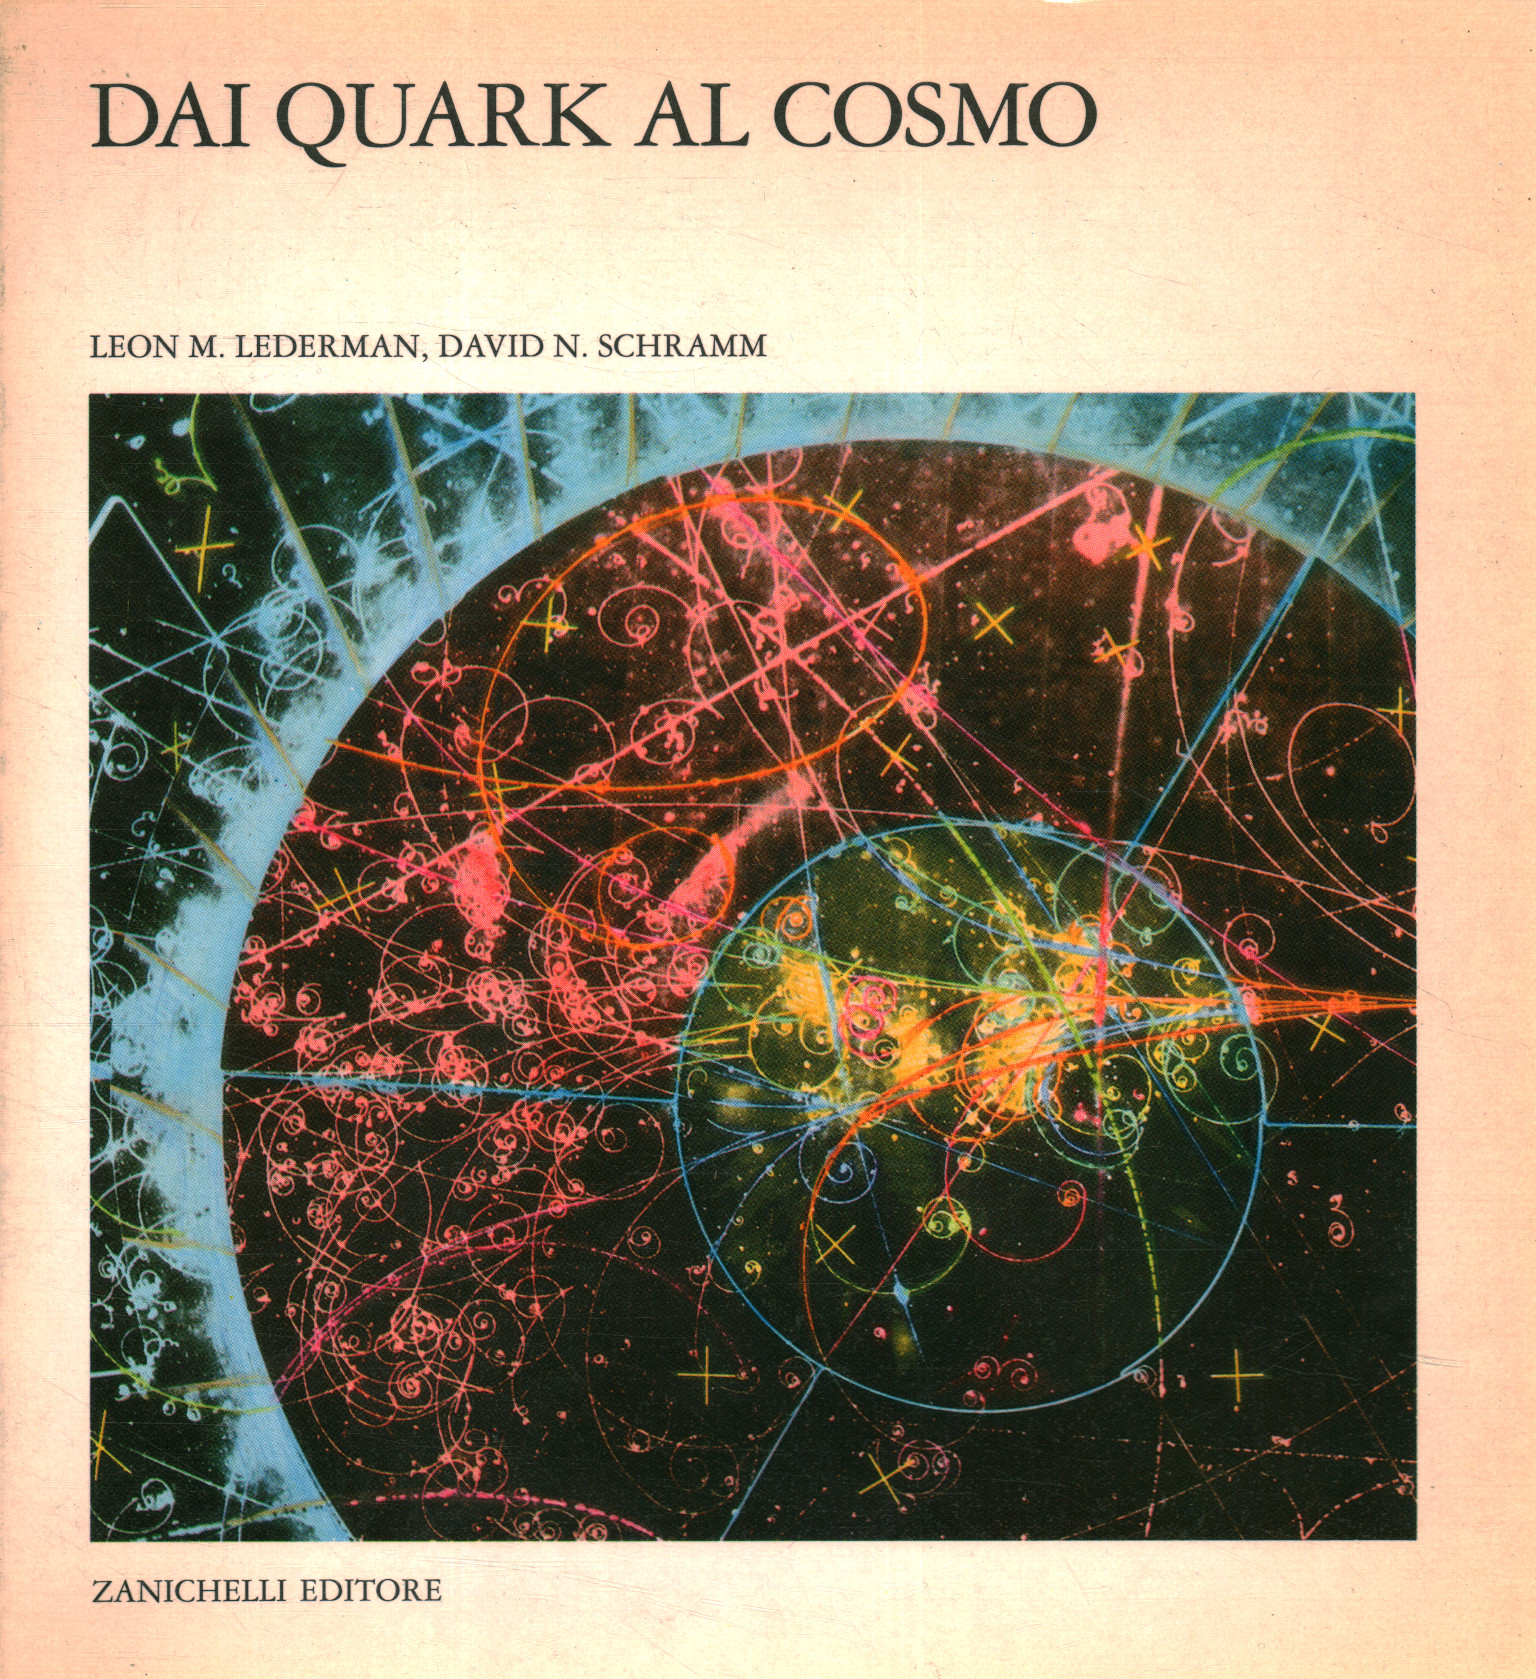 From quarks to the cosmos